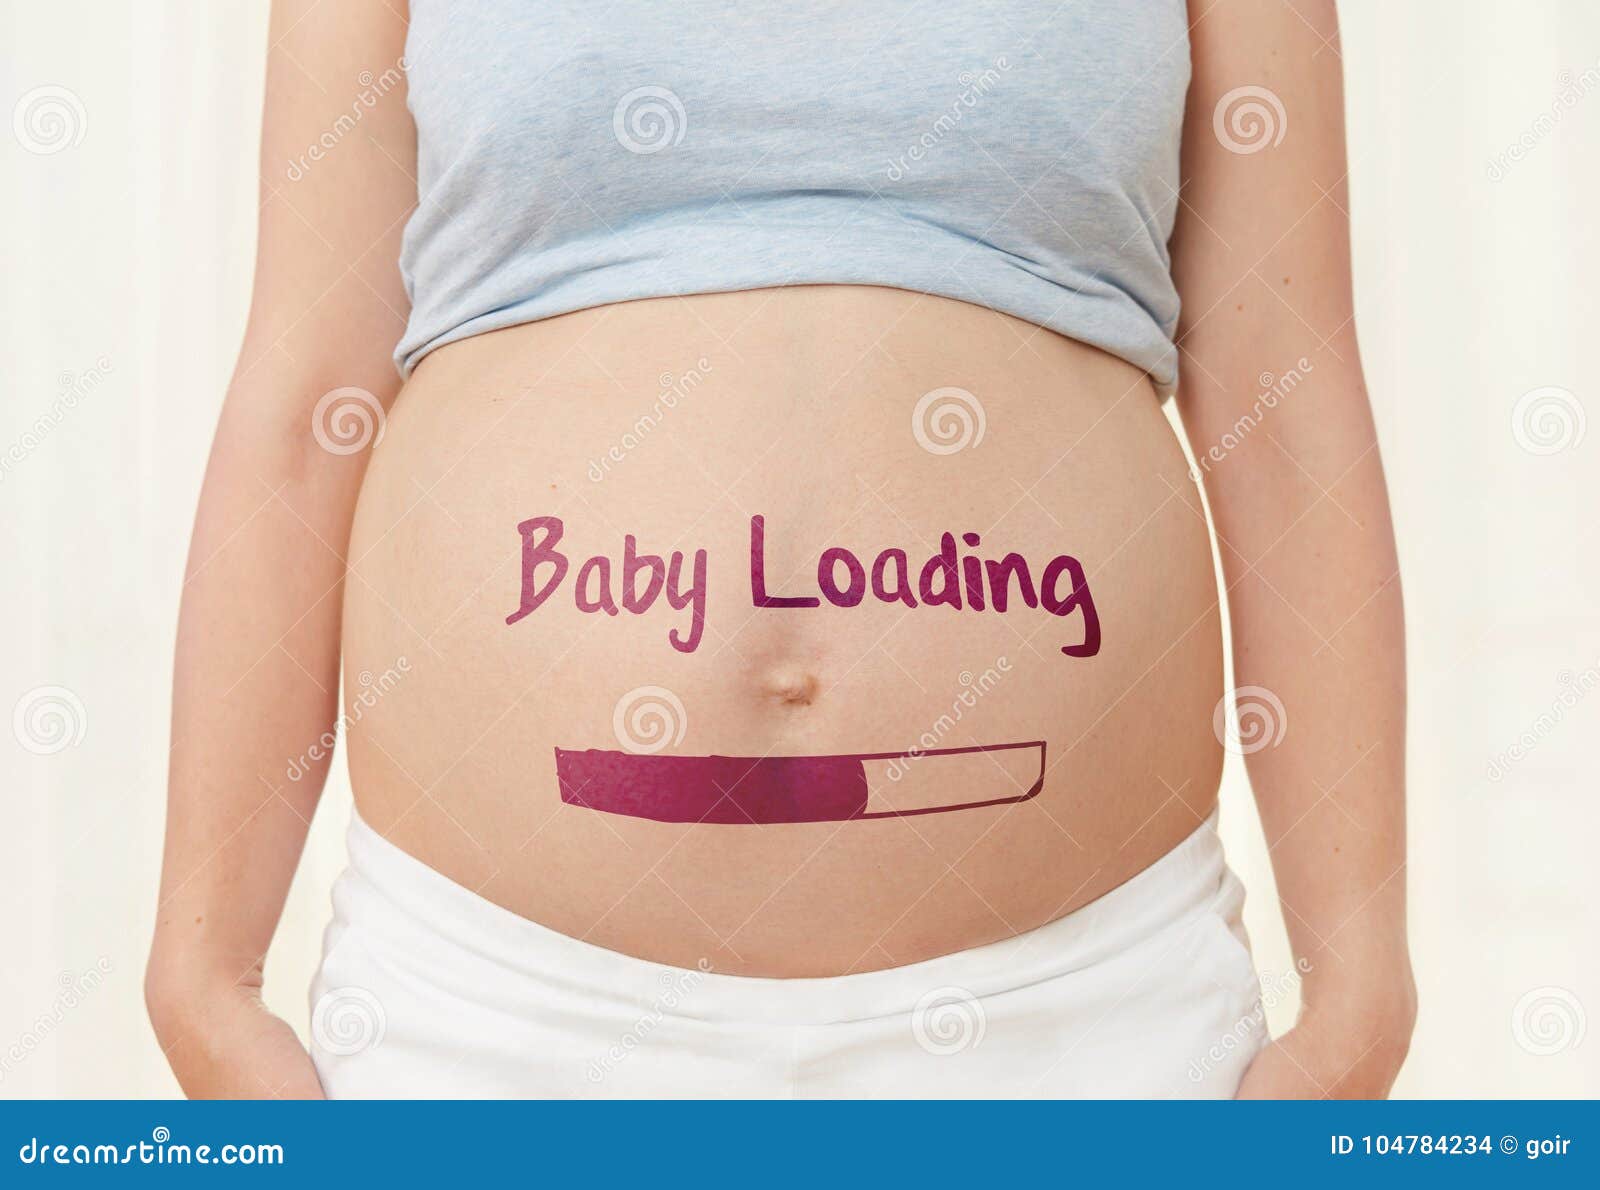 624 Baby Loading Photos Free Royalty Free Stock Photos From Dreamstime